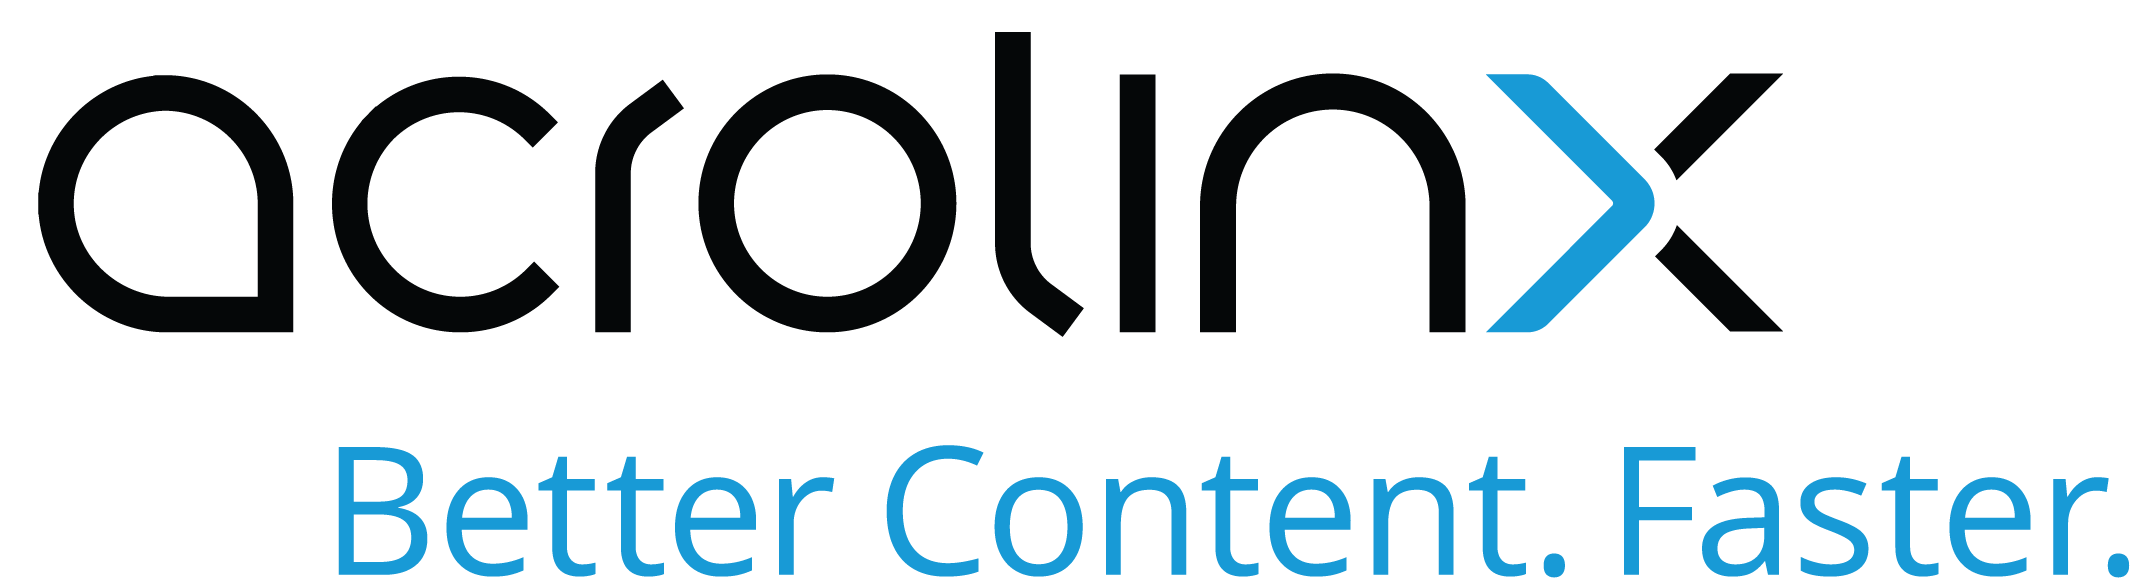 Acrolinx - Create Great Content at Scale